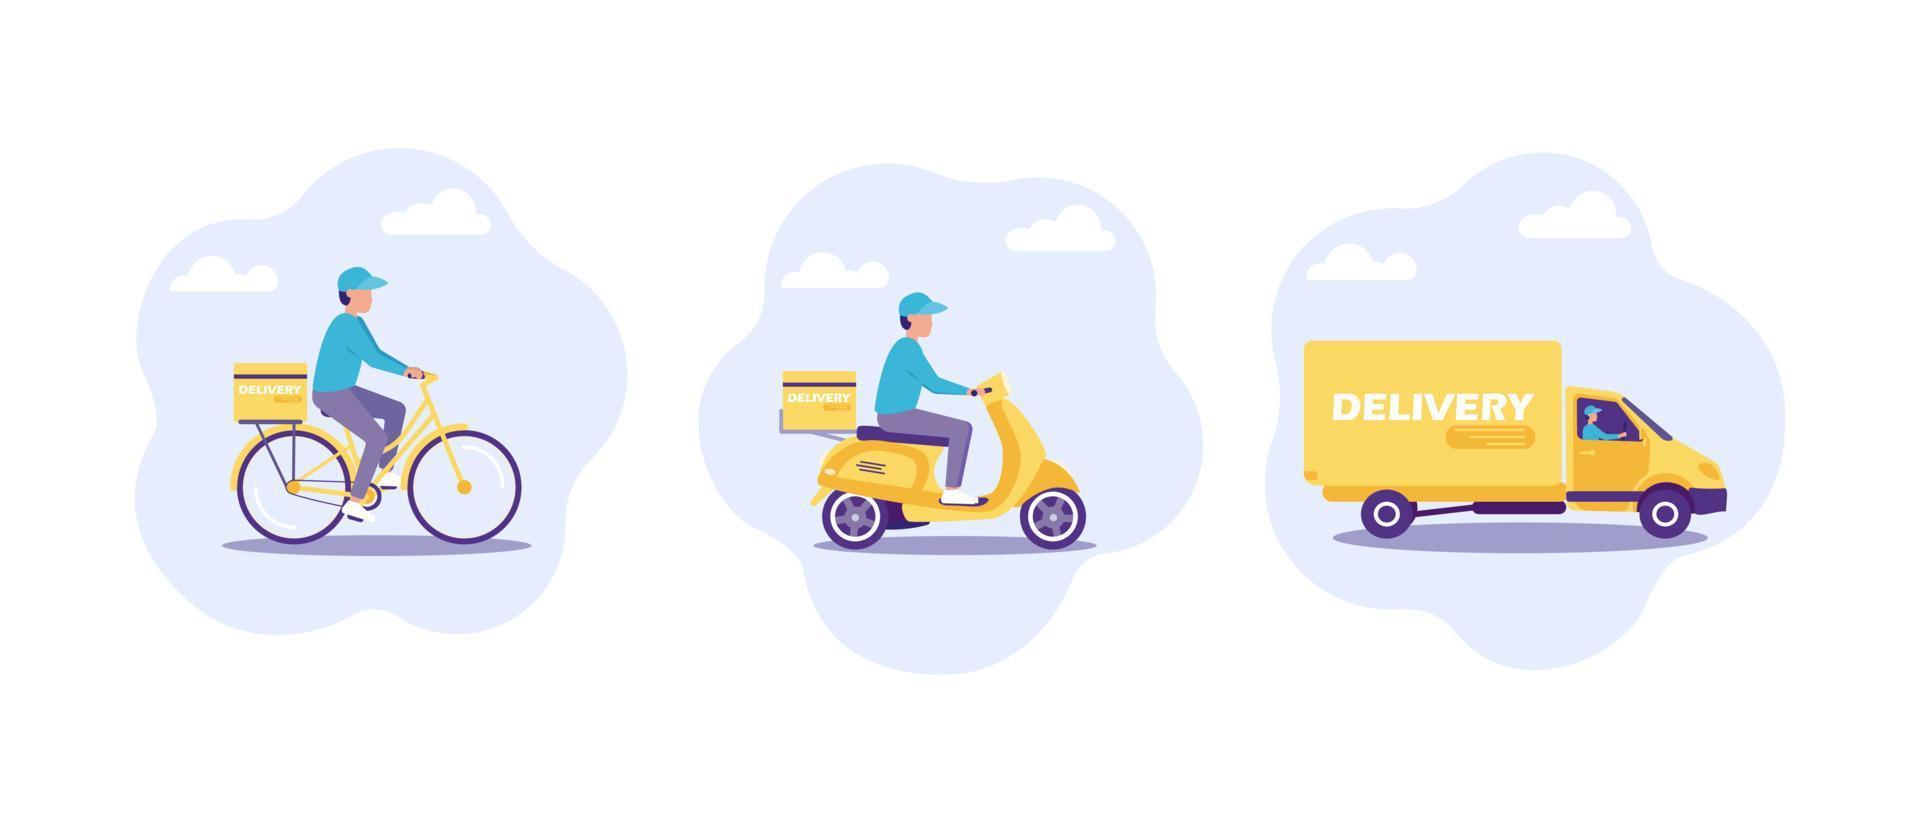 Concept of an online delivery service to your home and office. Courier by bike, scooter and truck. Vector illustration